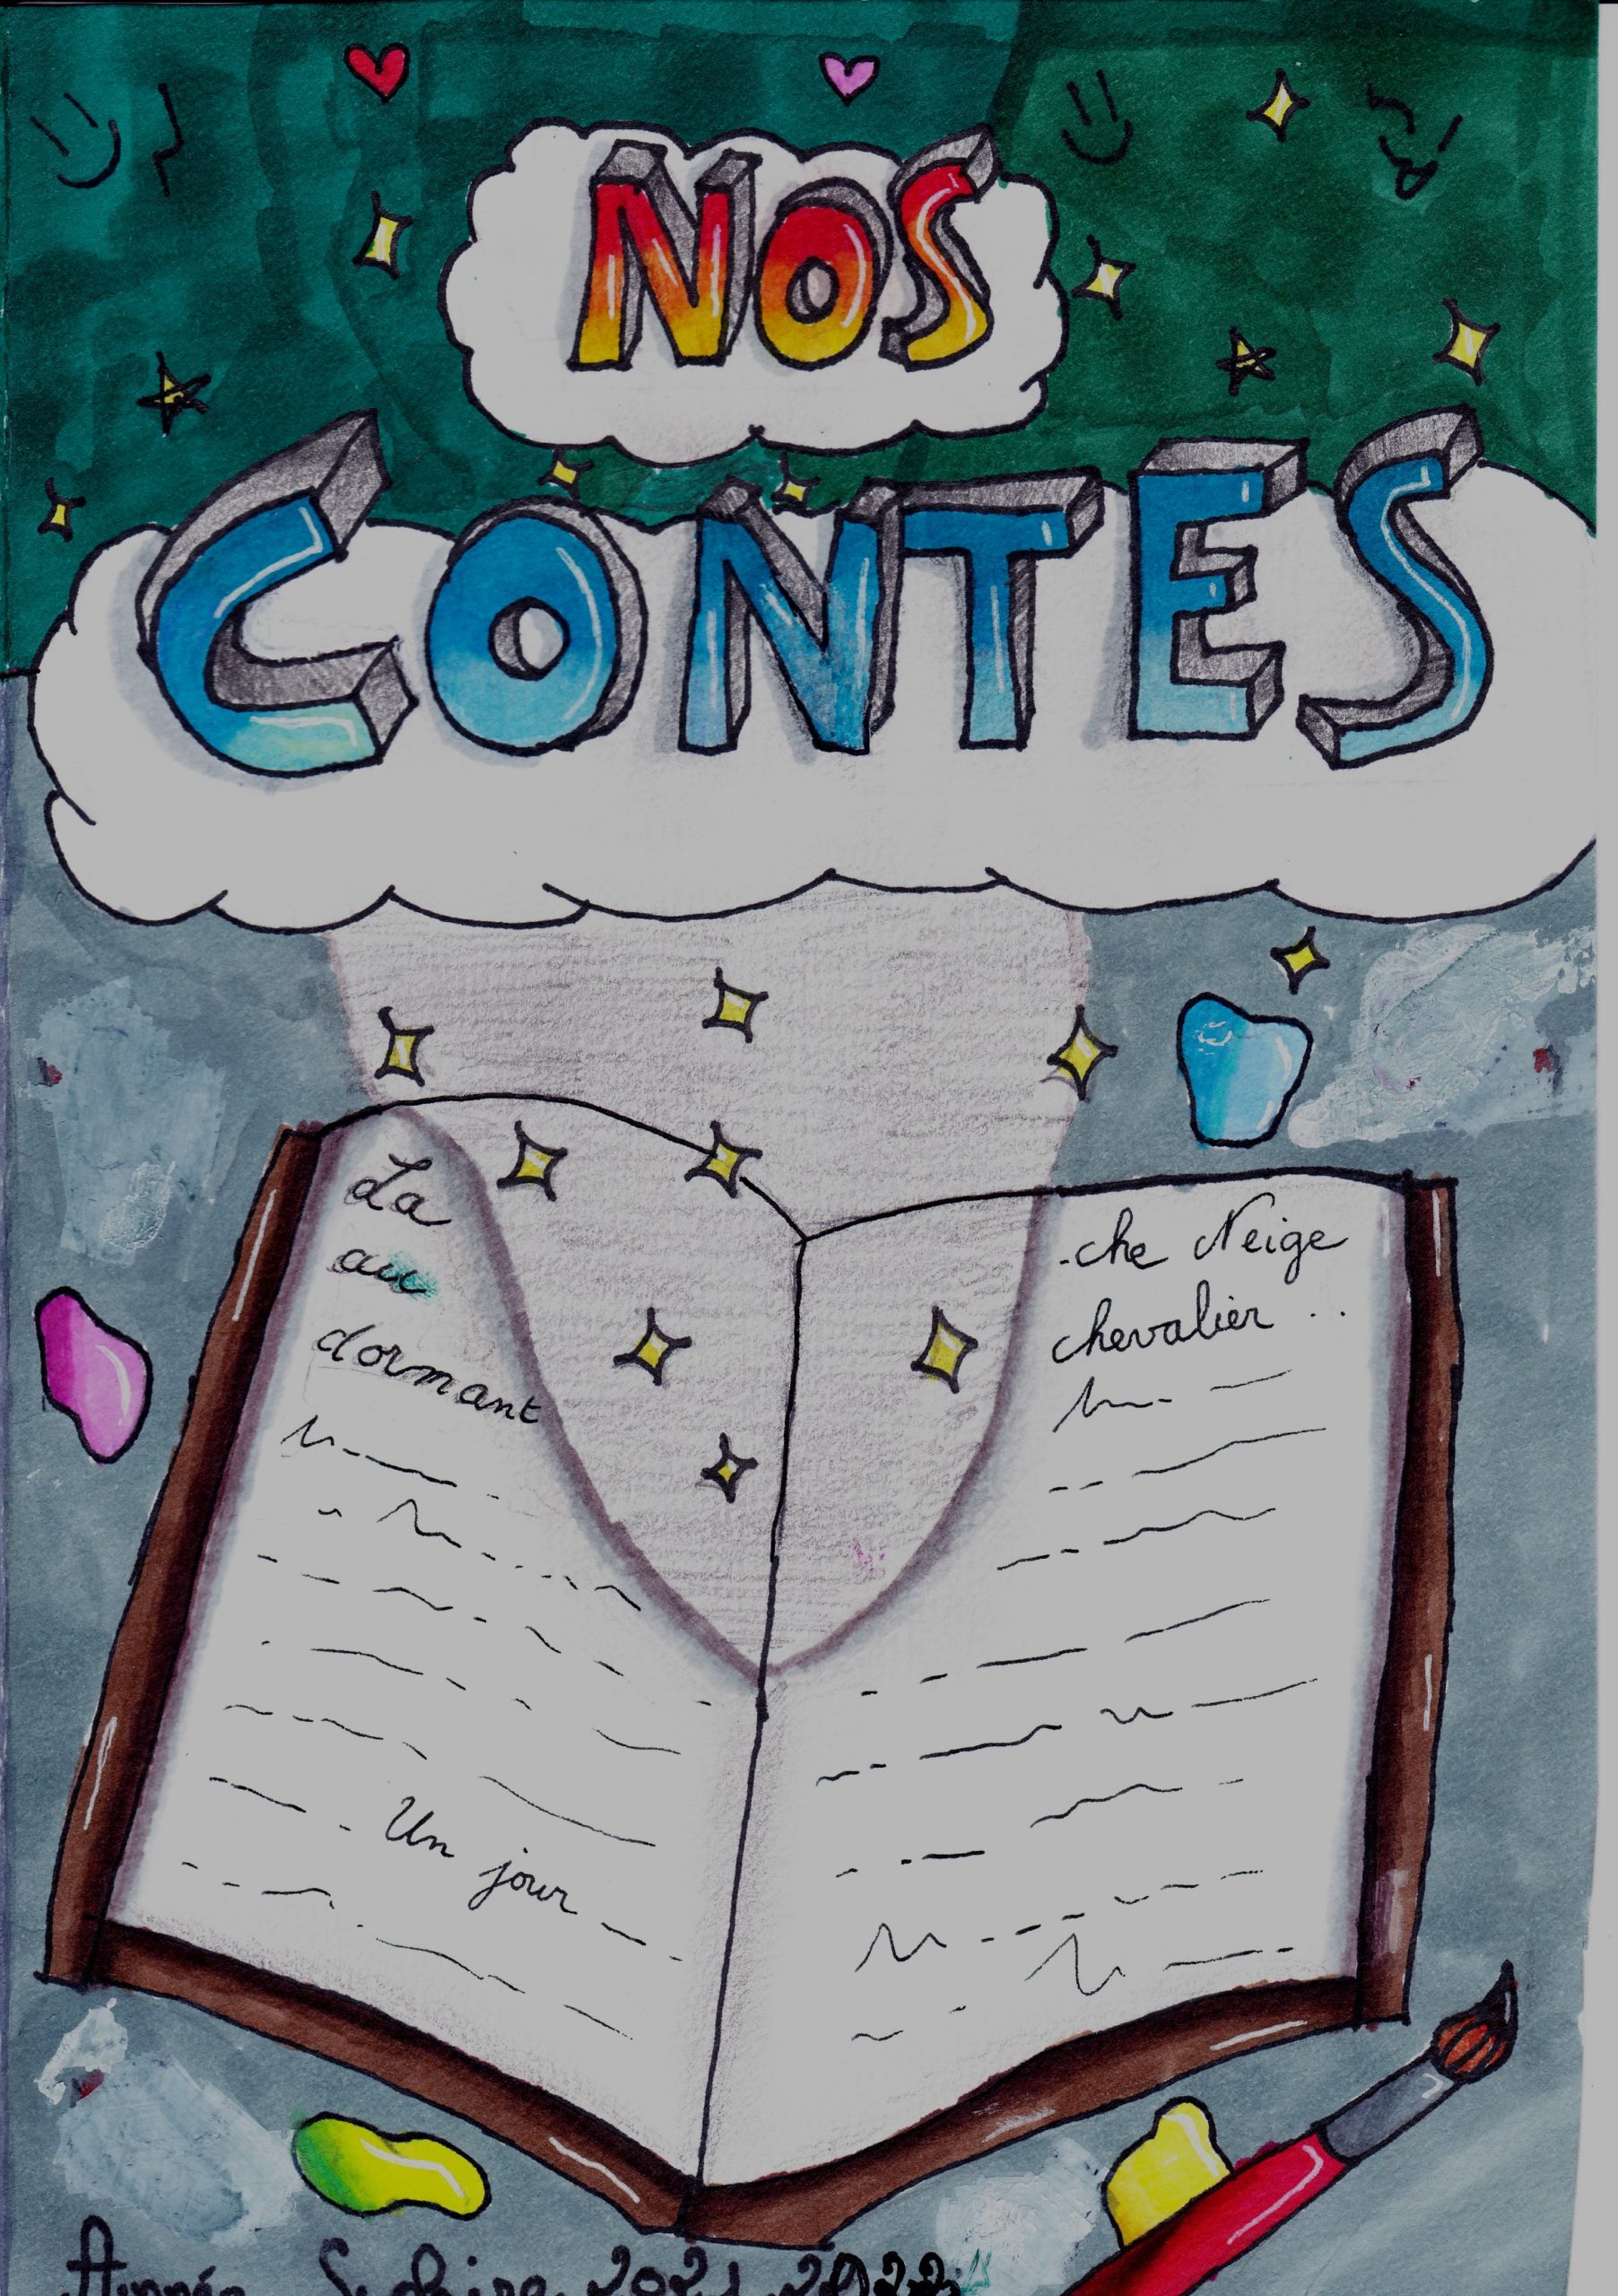 You are currently viewing Nos contes: Projet national d’écriture collaborative.